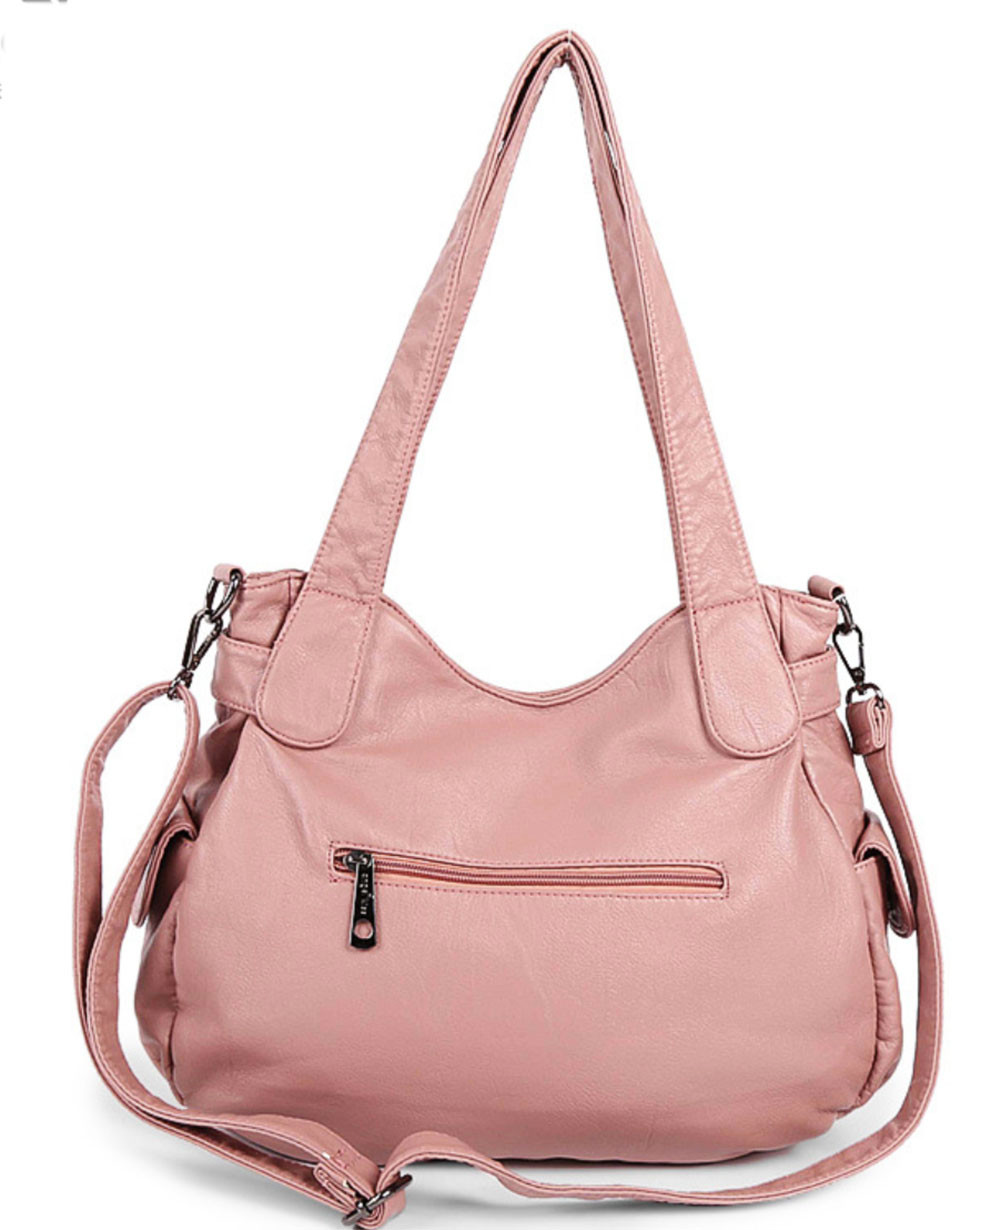 Buy online Pink Leatherette (pu) Regular Handbag from bags for Women by  Esbeda for ₹3099 at 20% off